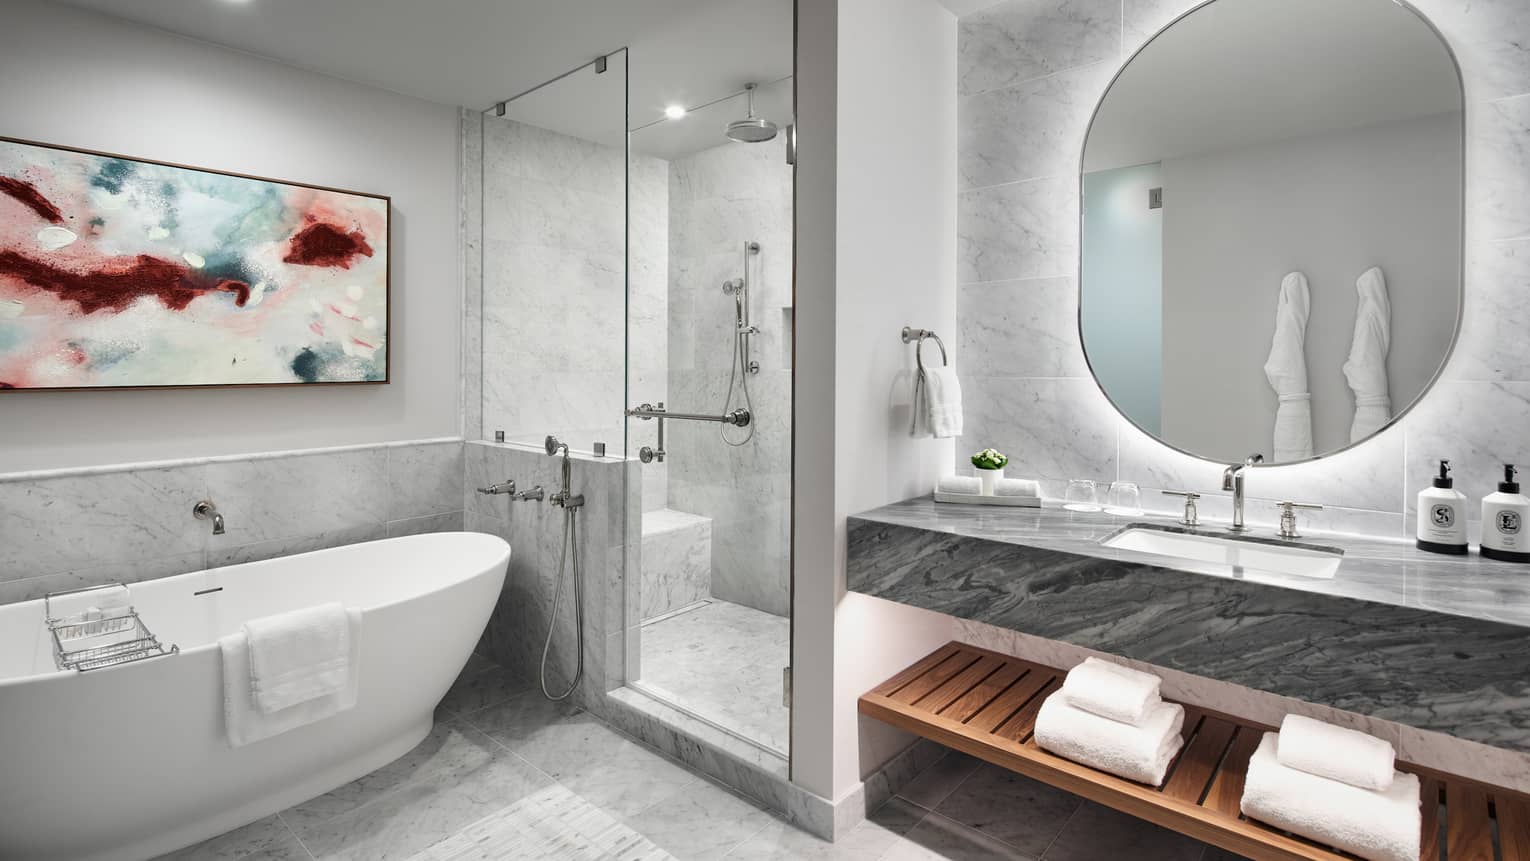 Luxury hotel suite bathroom with marble walls and floors, walk-in shower and deep-soaking tub